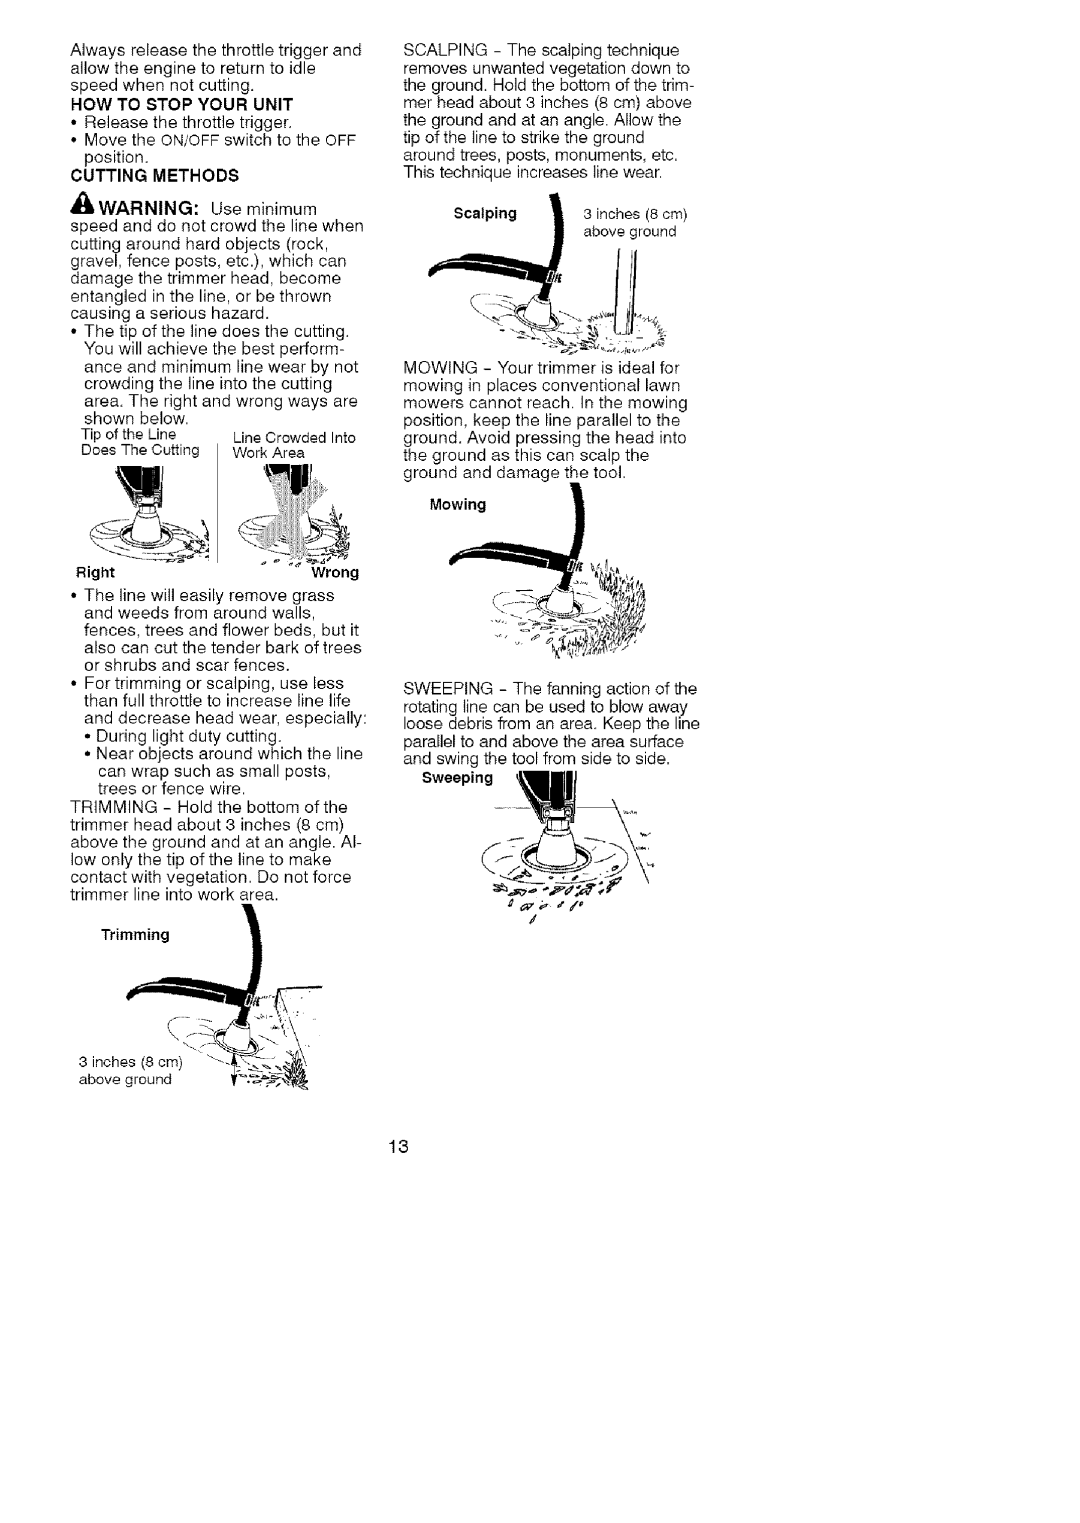 Craftsman 358-79104 operating instructions Howto Stop Your Unit, Cutting Methods, Mowing, Trimming, Sweeping 